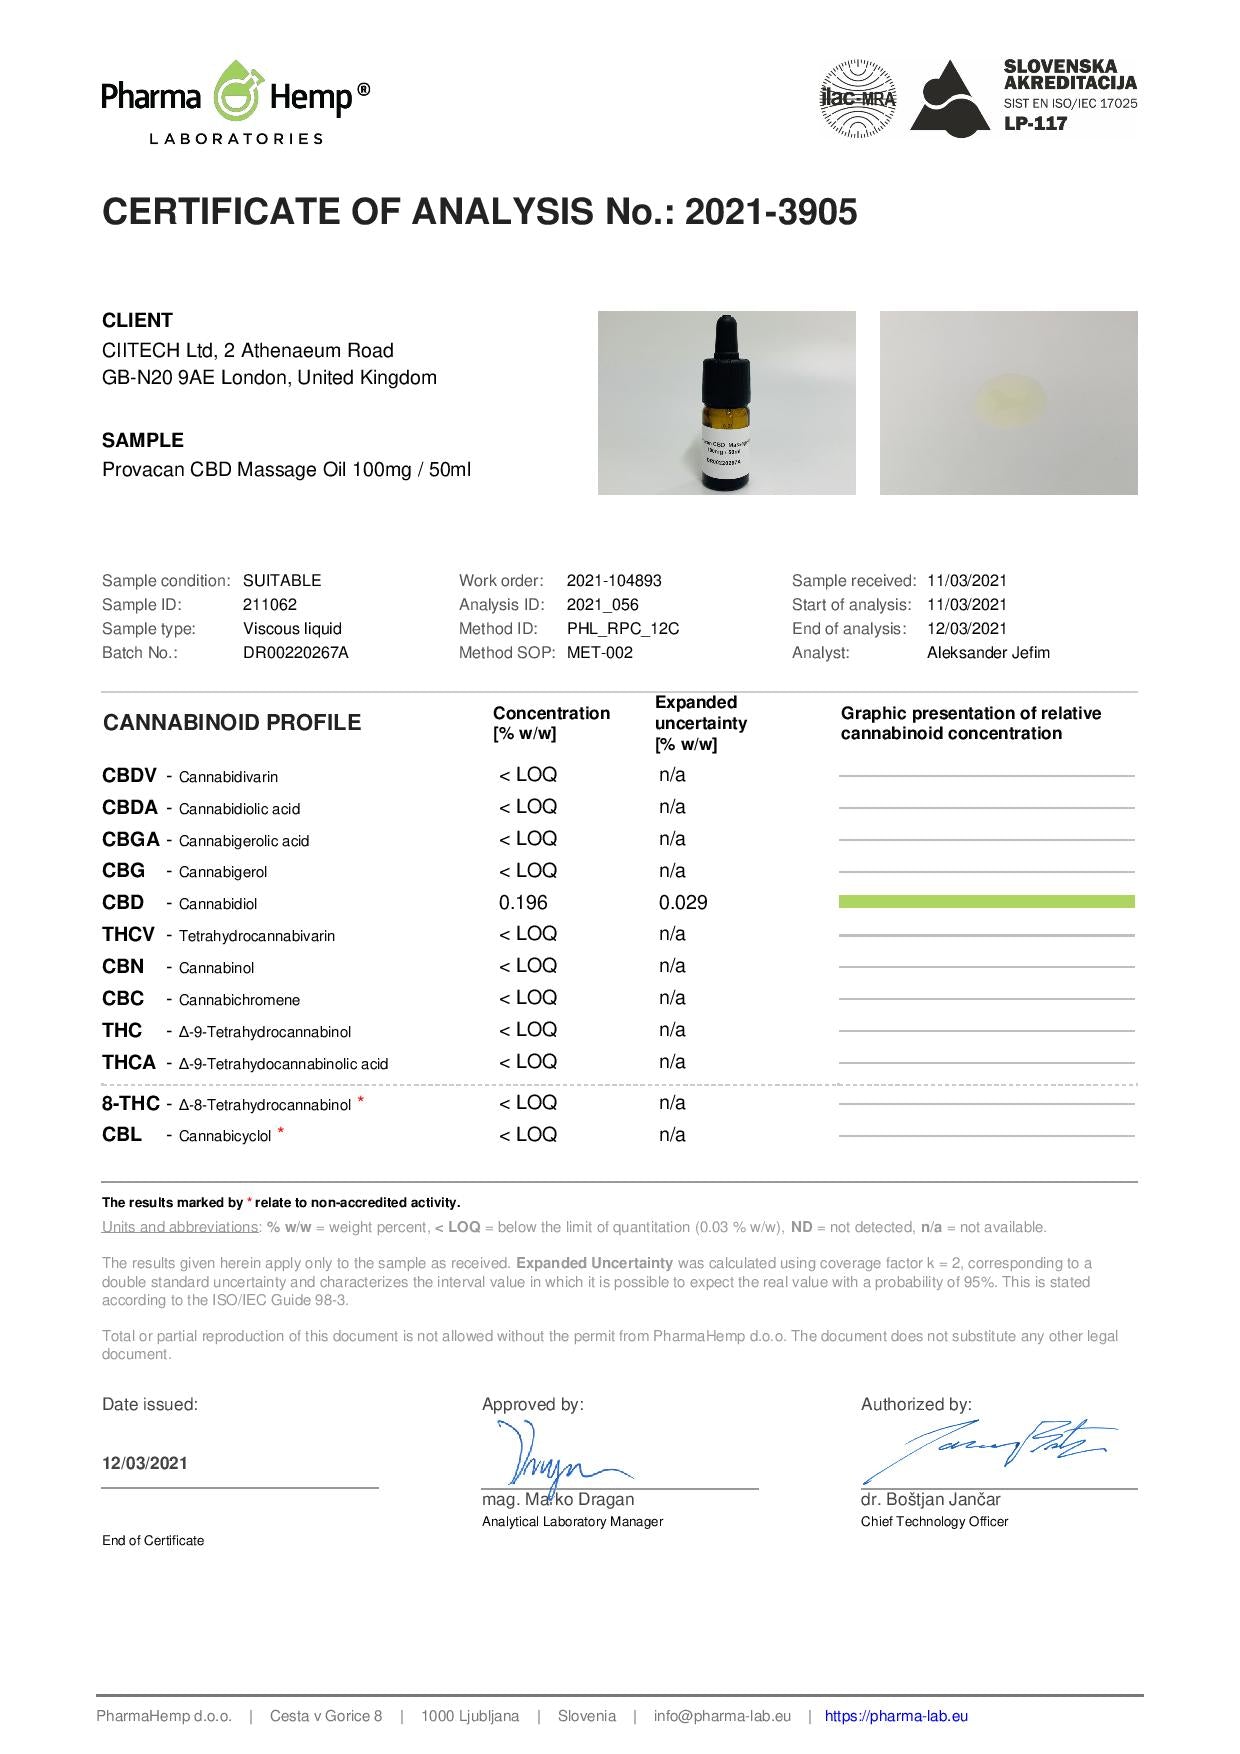 made by: Provacan price:£19.00 Provacan 100mg CBD Massage Oil - 50ml next day delivery at Vape Street UK